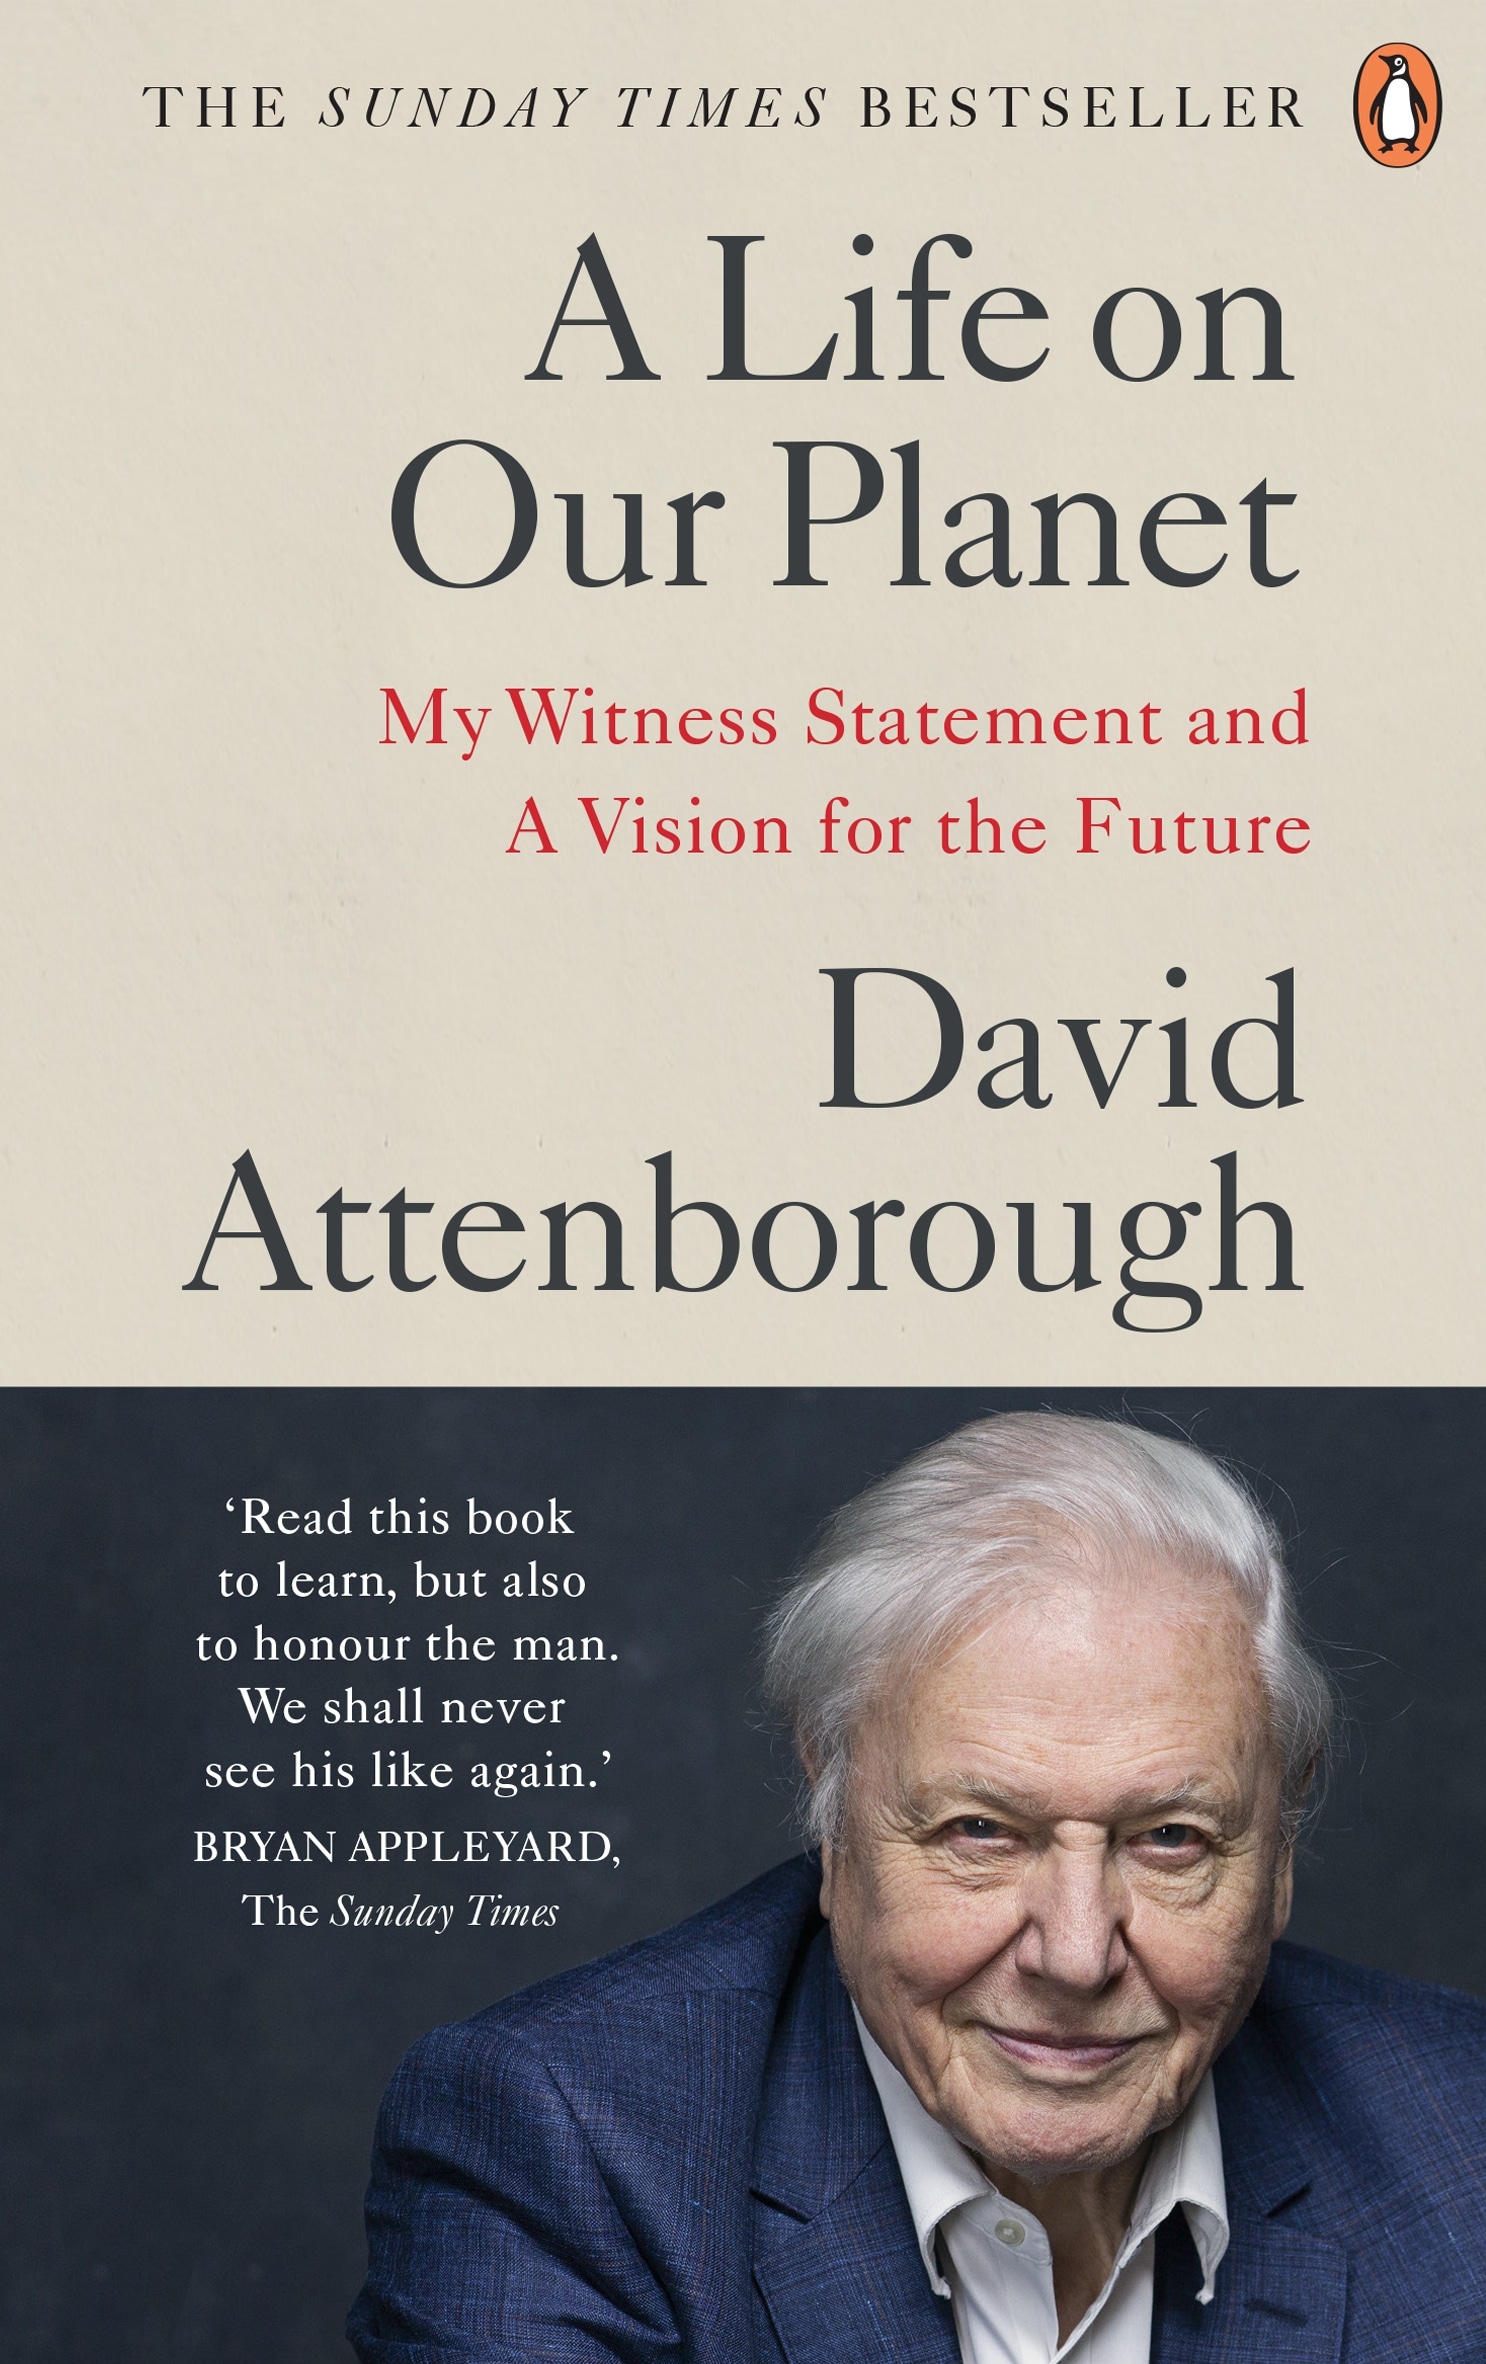 Book “A Life on Our Planet” by David Attenborough — May 12, 2022